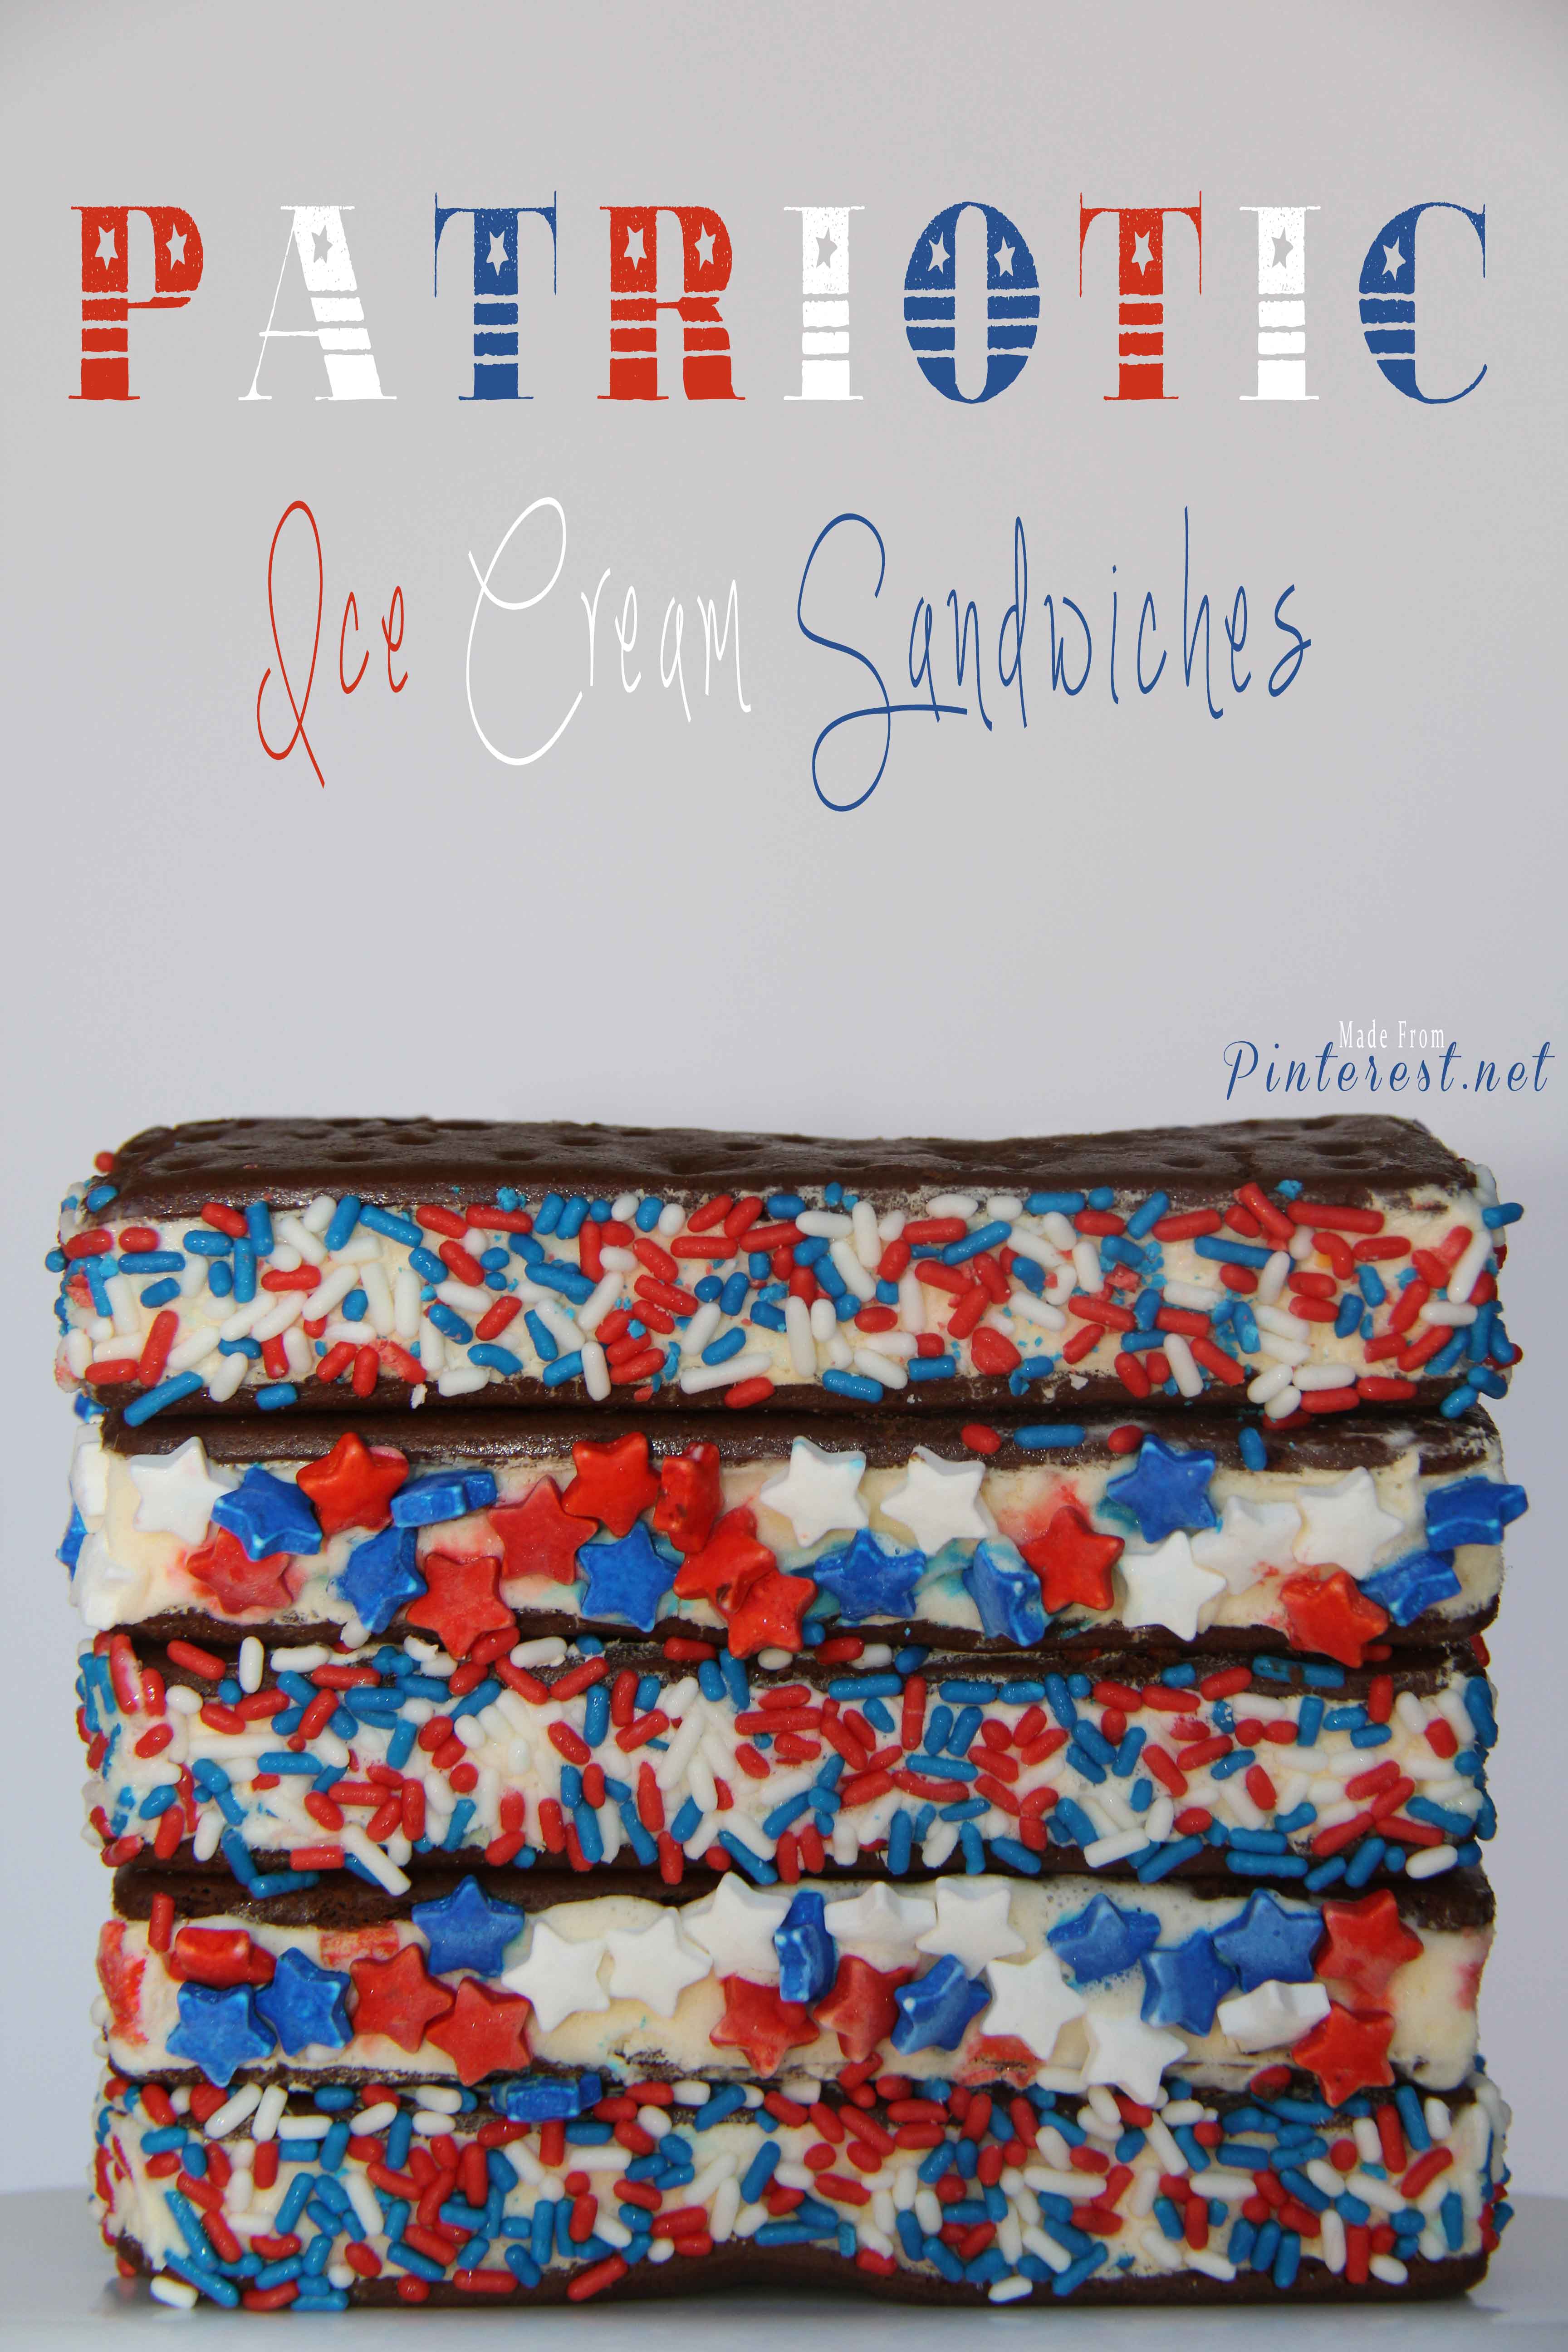 #Ice Cream Sandwiches #Patriotic - Jazz up plain ice cream sandwiches with red, white and blue sprinkles. #4th of July  This pin was tested and reviewed by one of the 3 crazy sisters at https://www.thisgrandmaisfun.com/